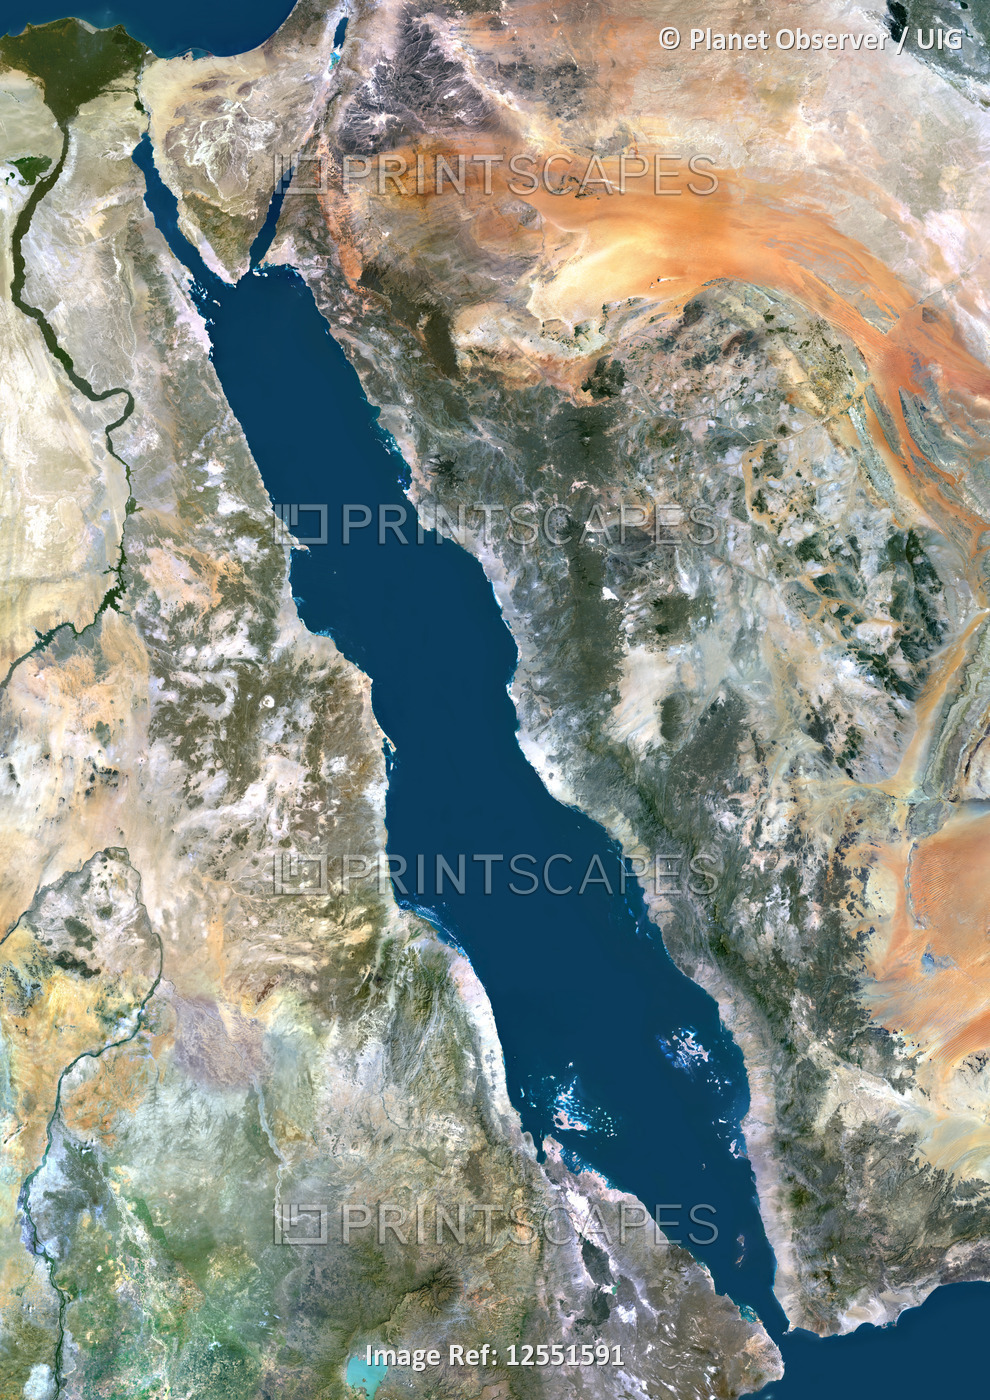 Red Sea, Middle East, True Colour Satellite Image. True colour satellite image of the Red Sea, a sea